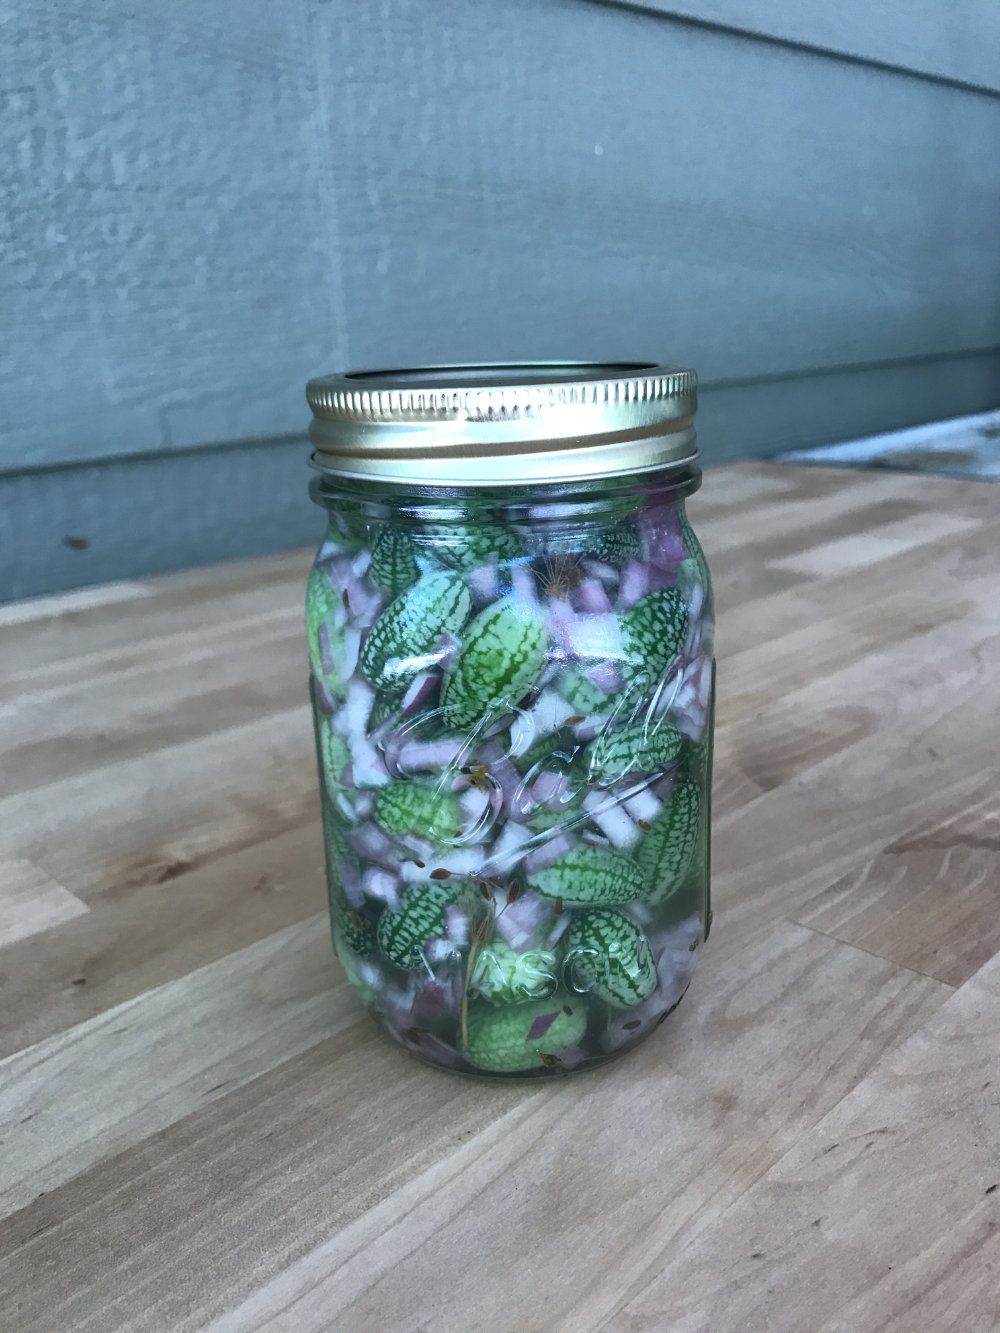 A jar of homemade pickled cucamelons.